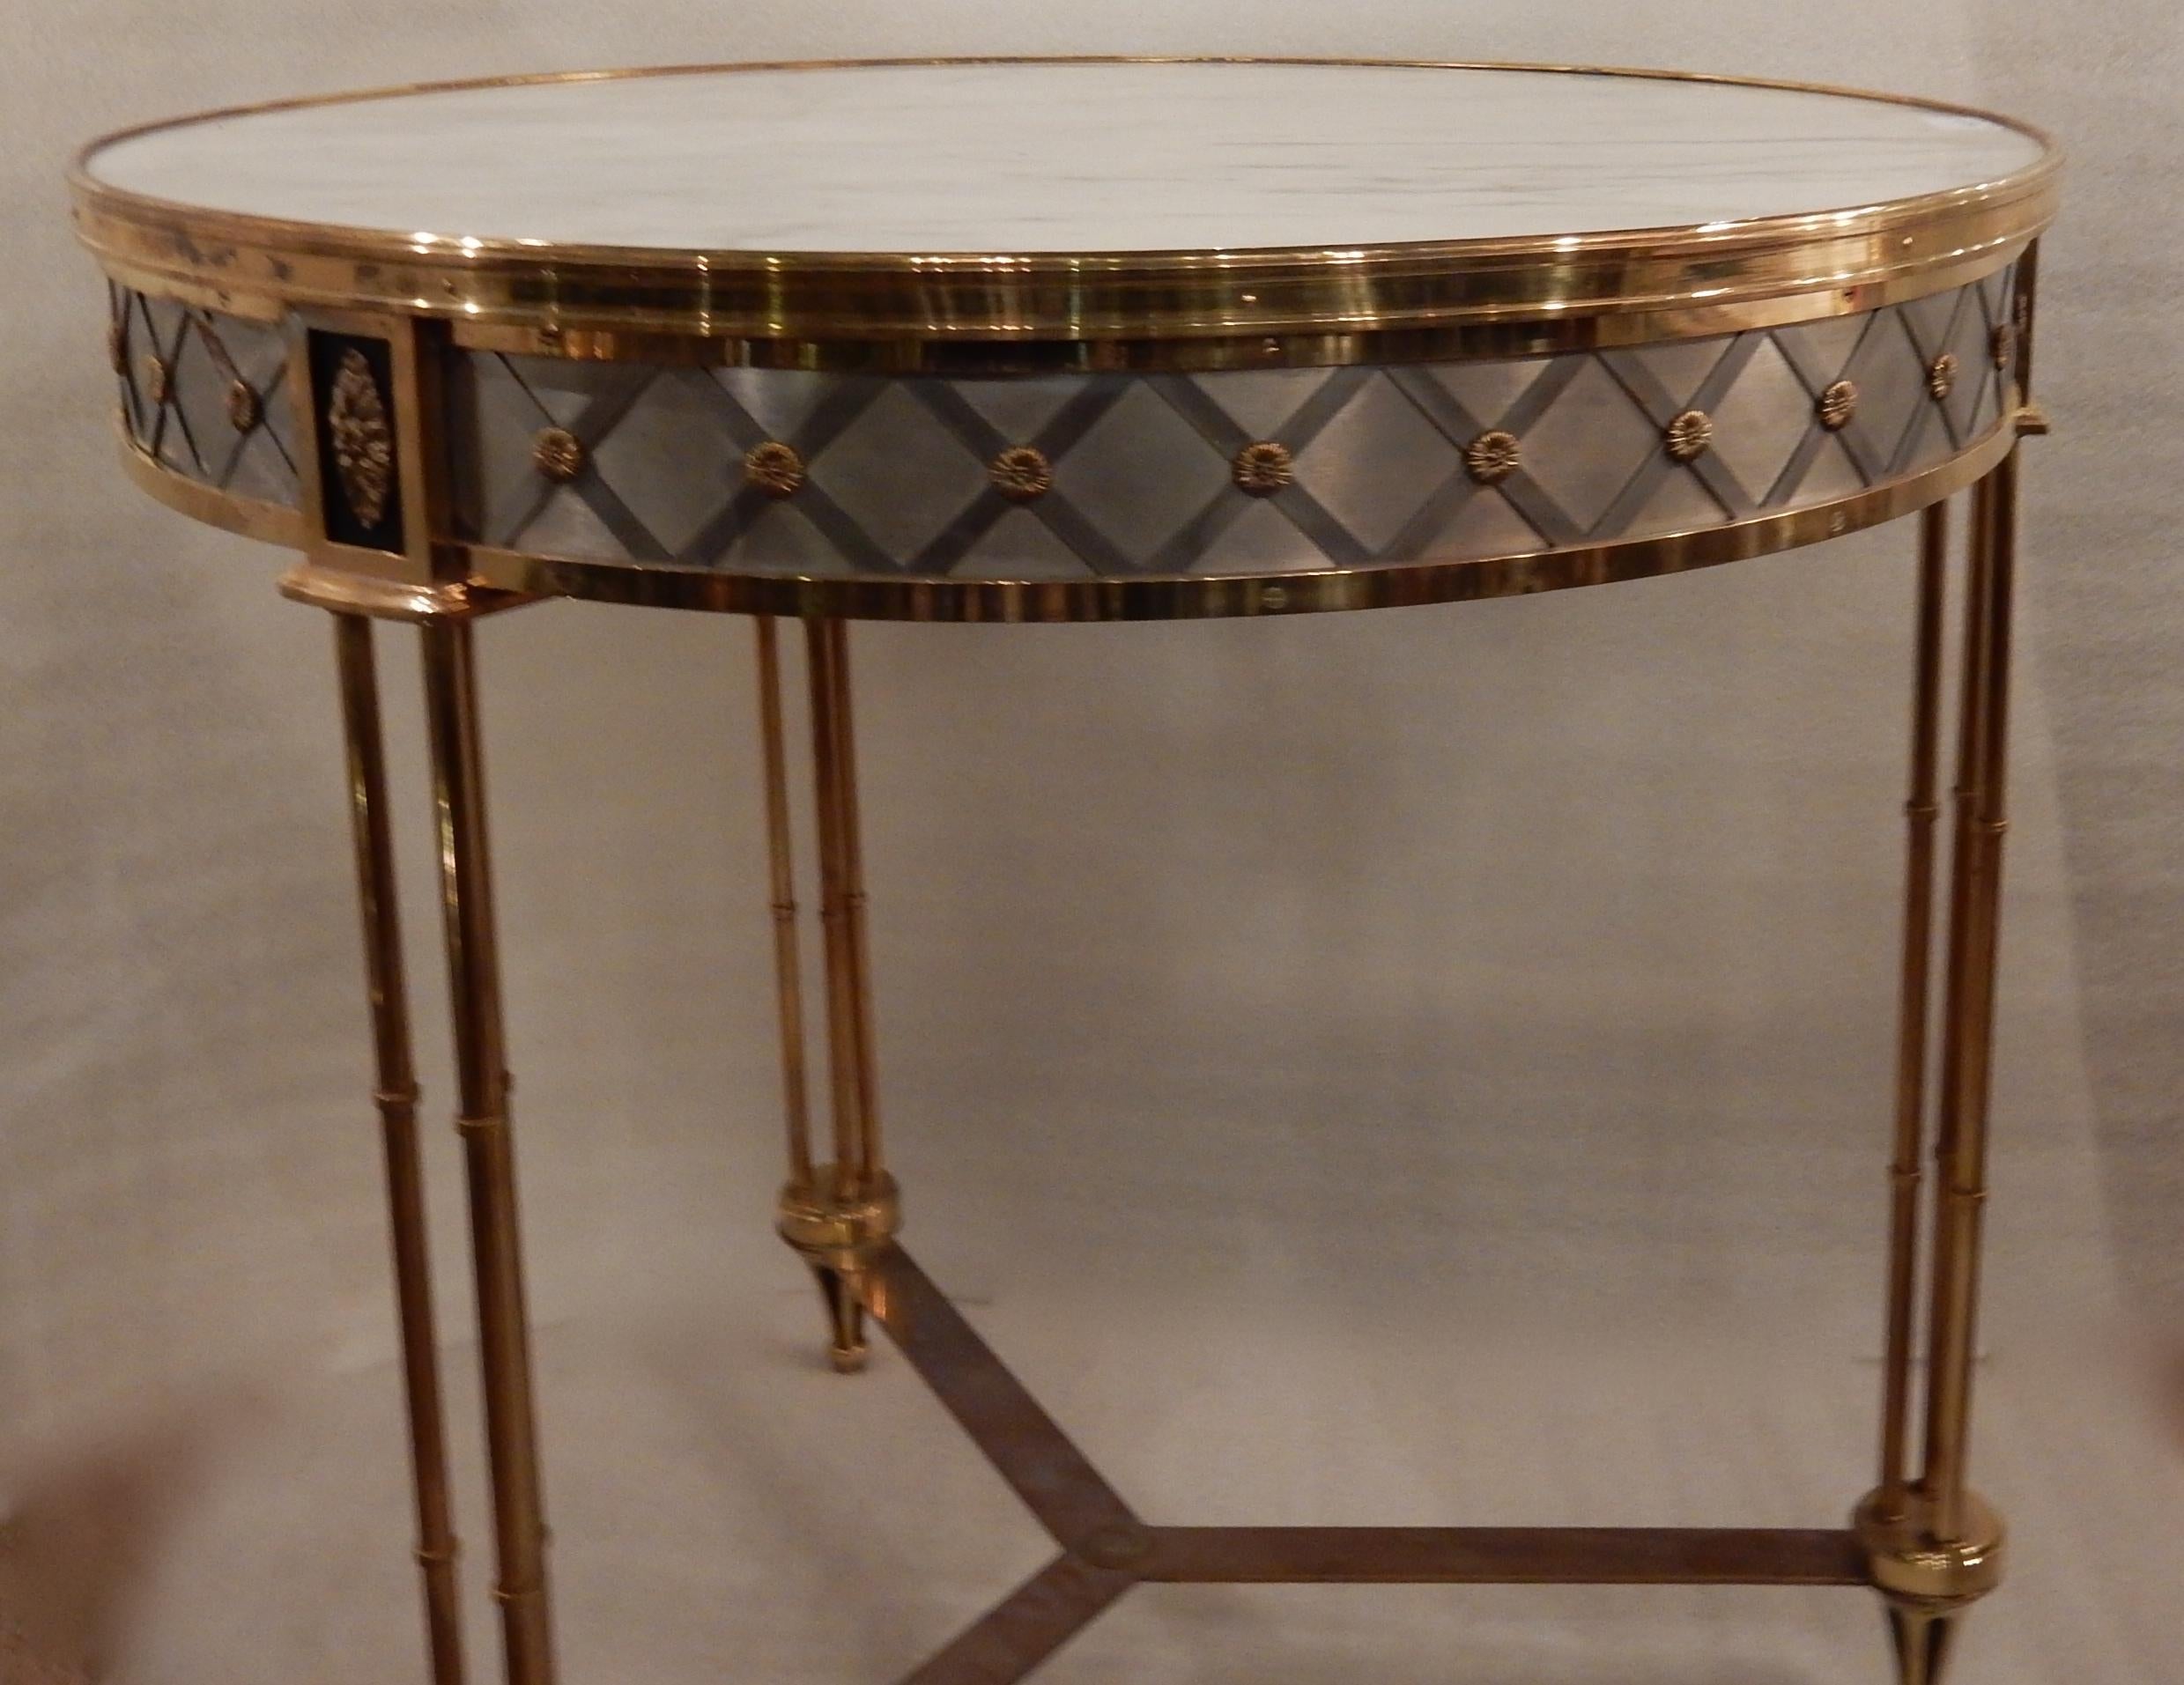 Directoire Pedestal Table attributed to Maison Jansen in the Style of Adam Weisweiler For Sale